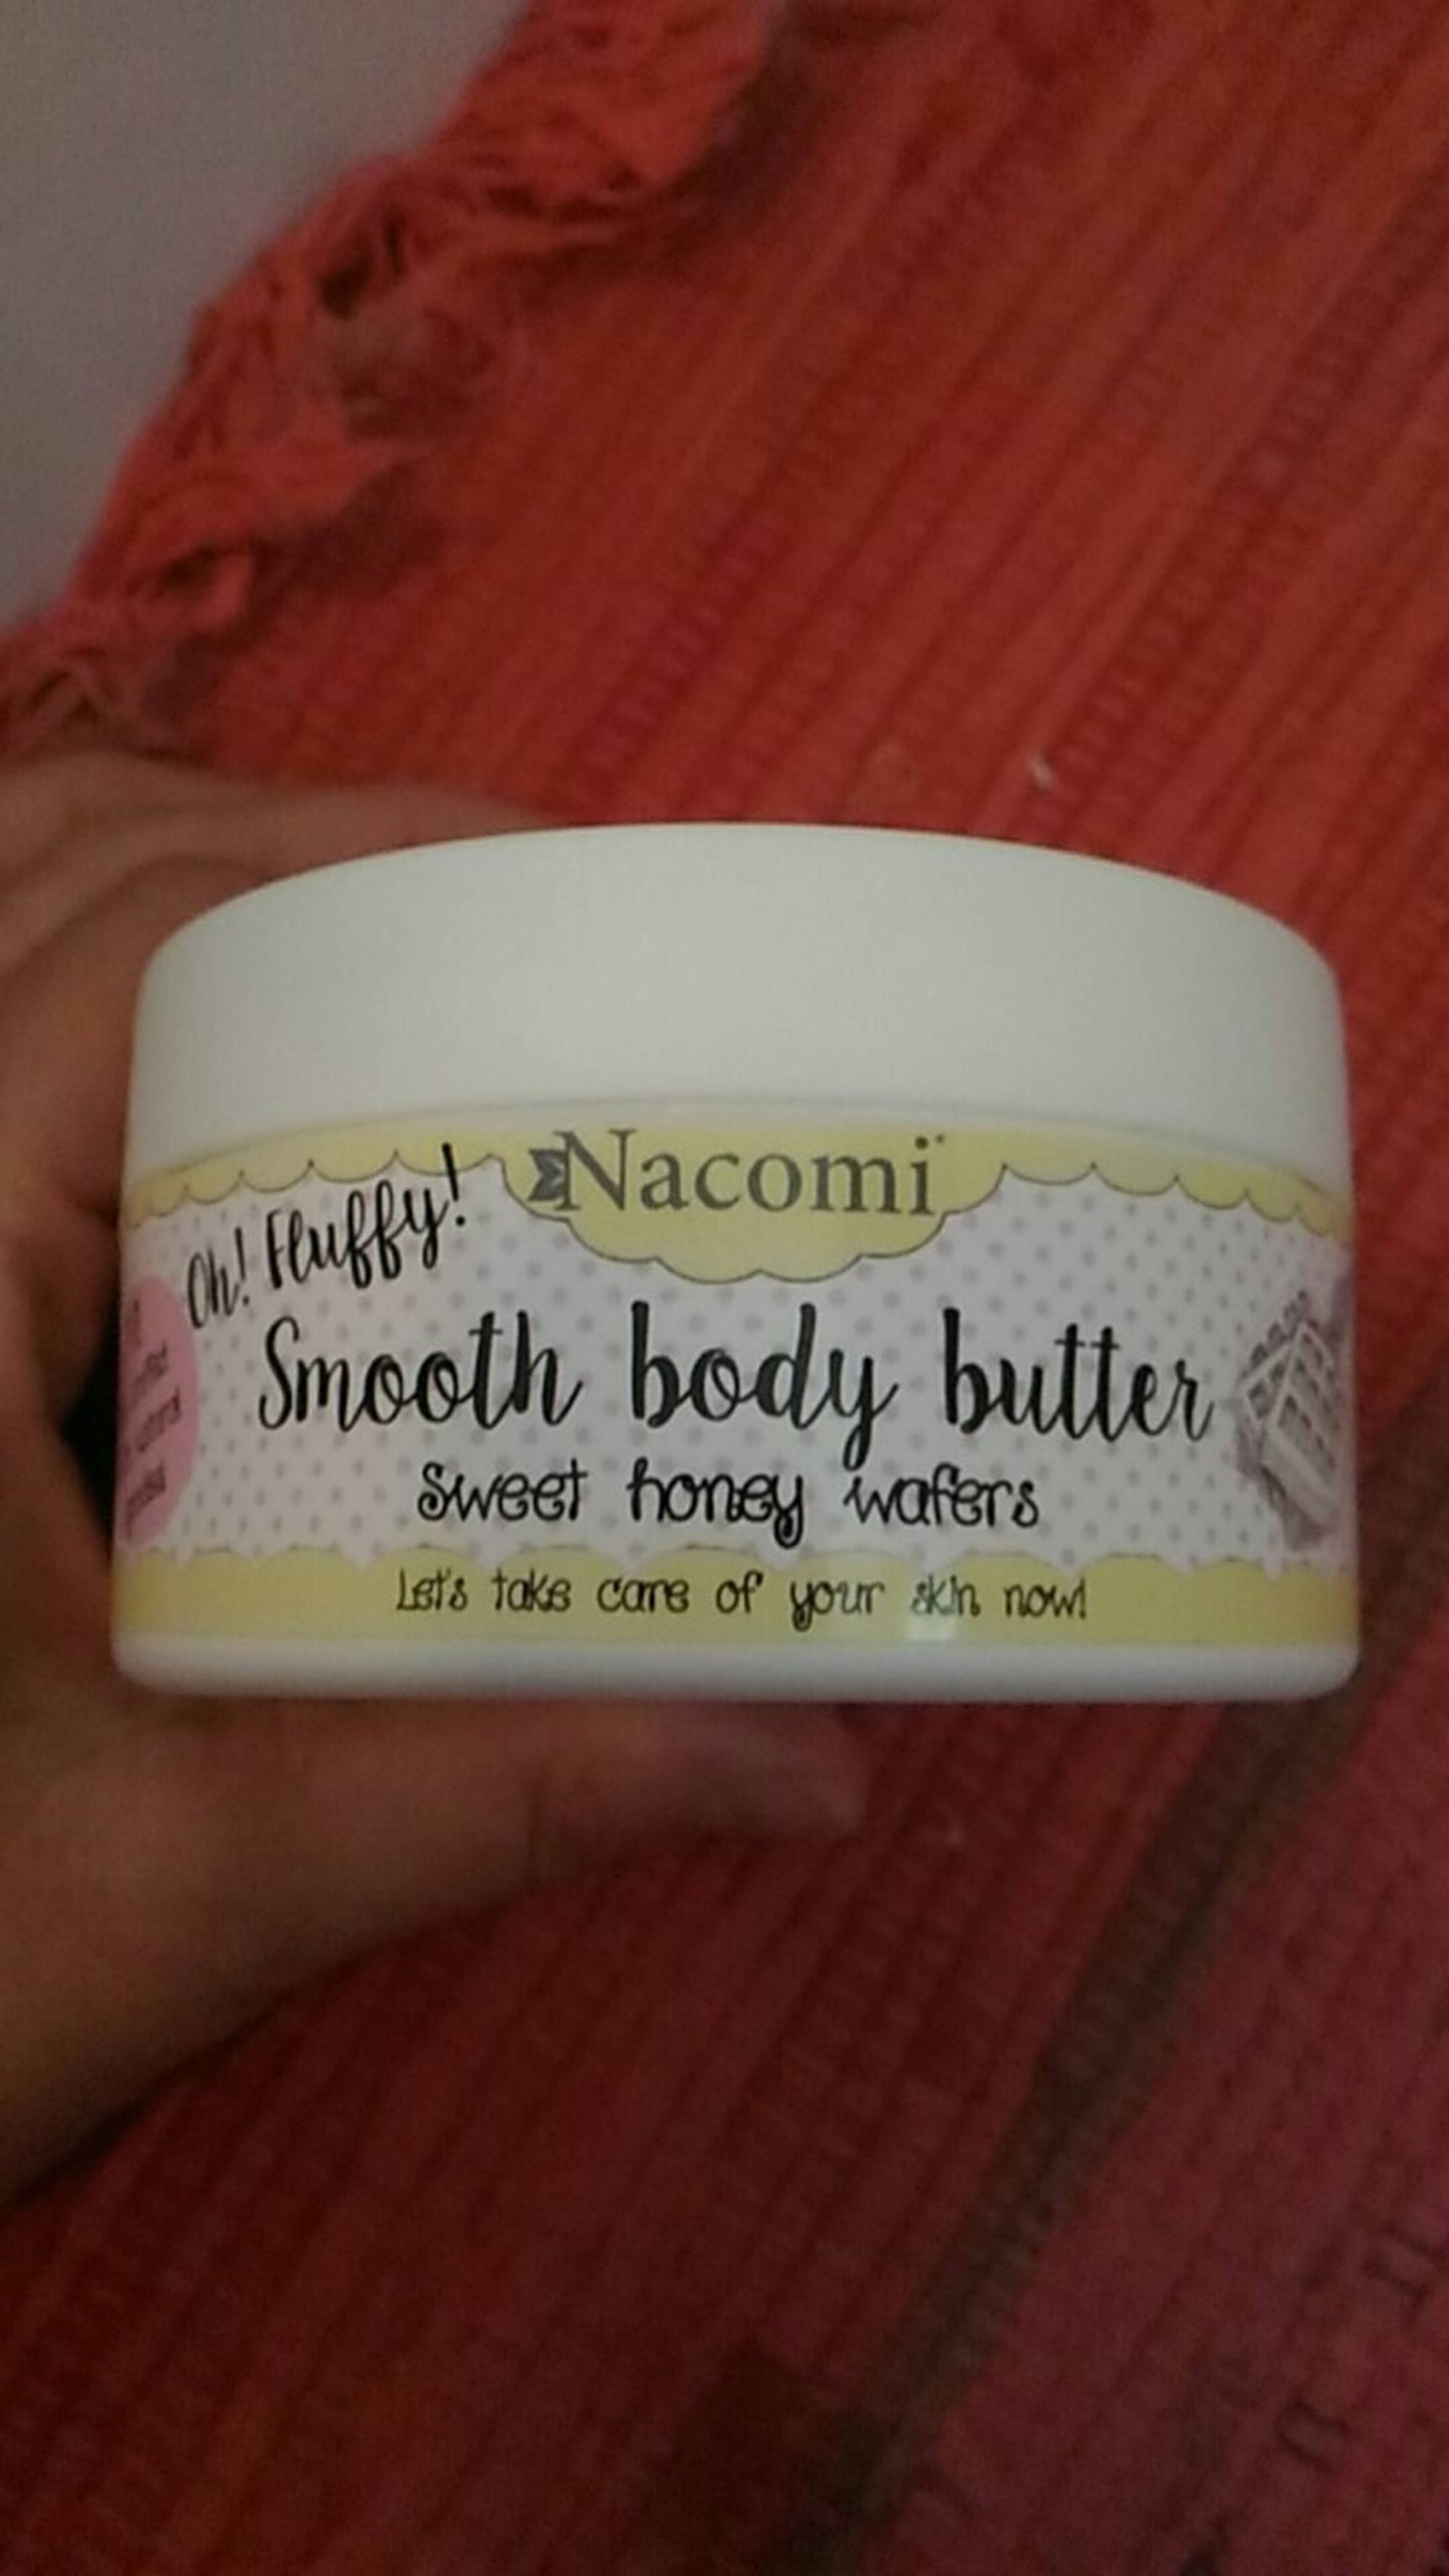 NACOMI - Sweet honey wafers - Smooth body butter